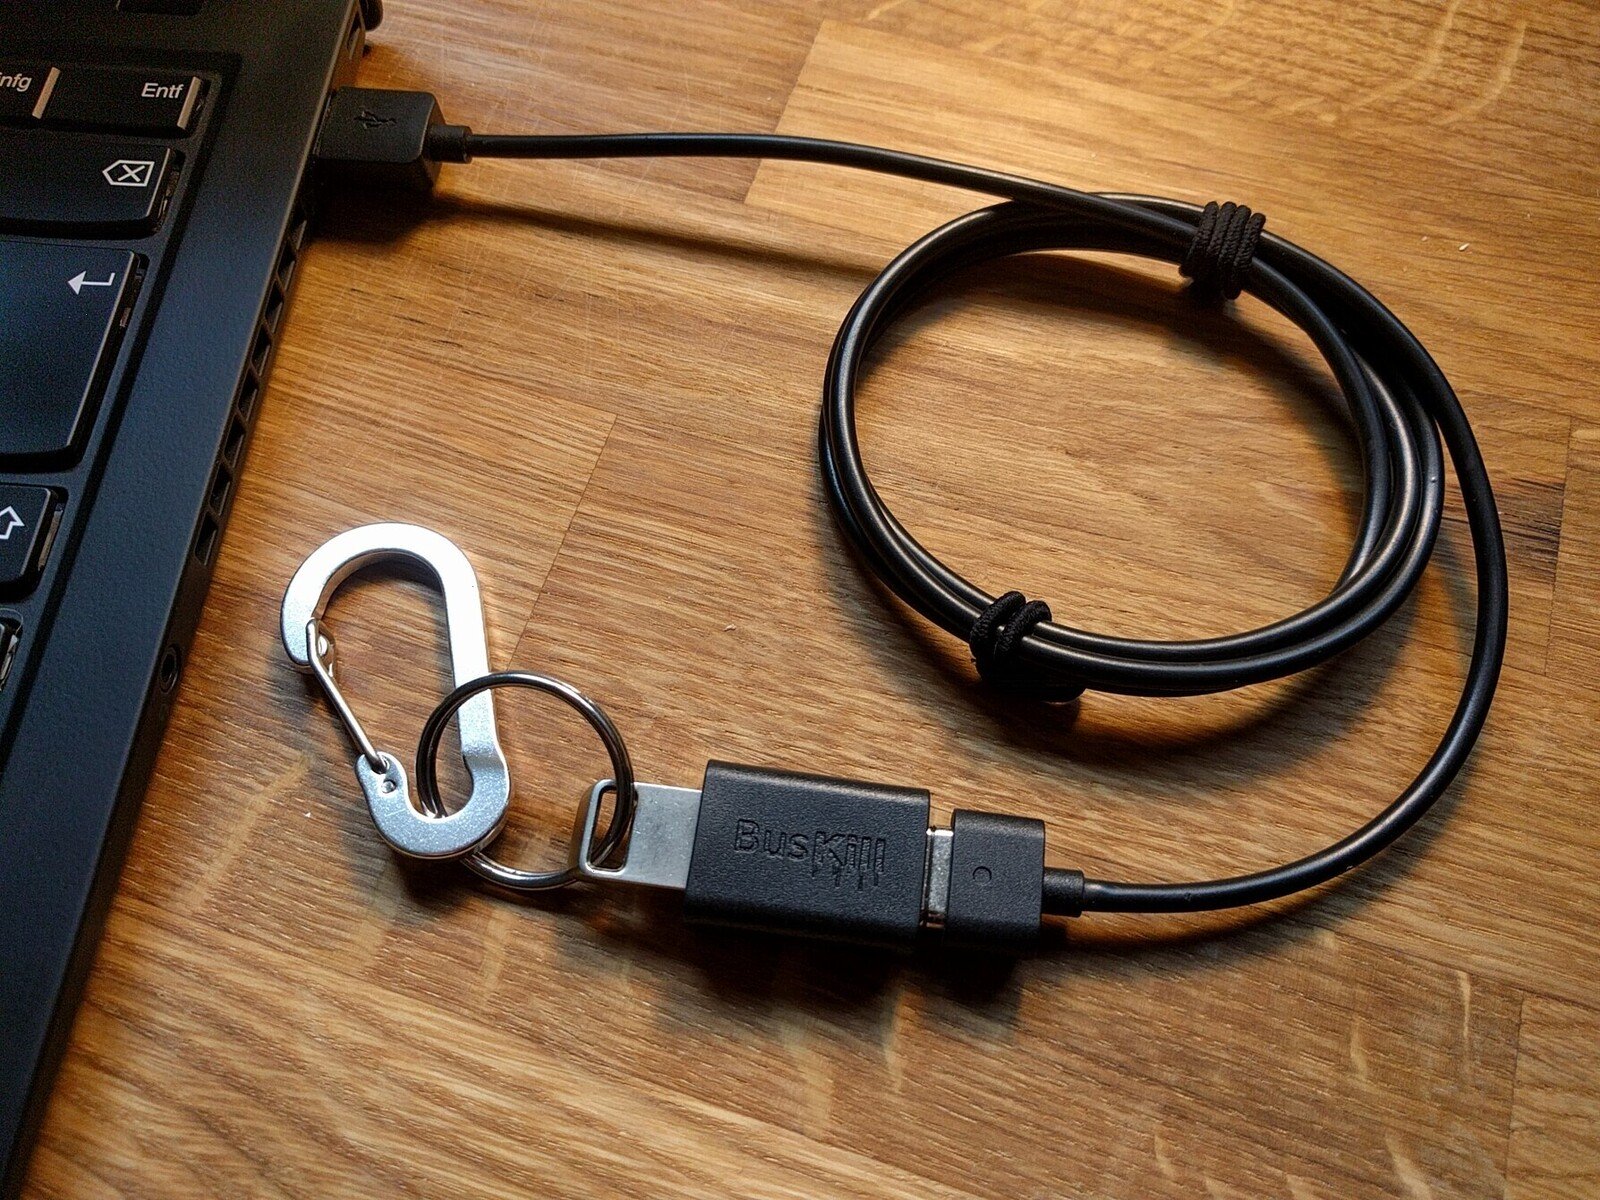 The assembled BusKill cable is plugged-into the USB-A port of a laptop